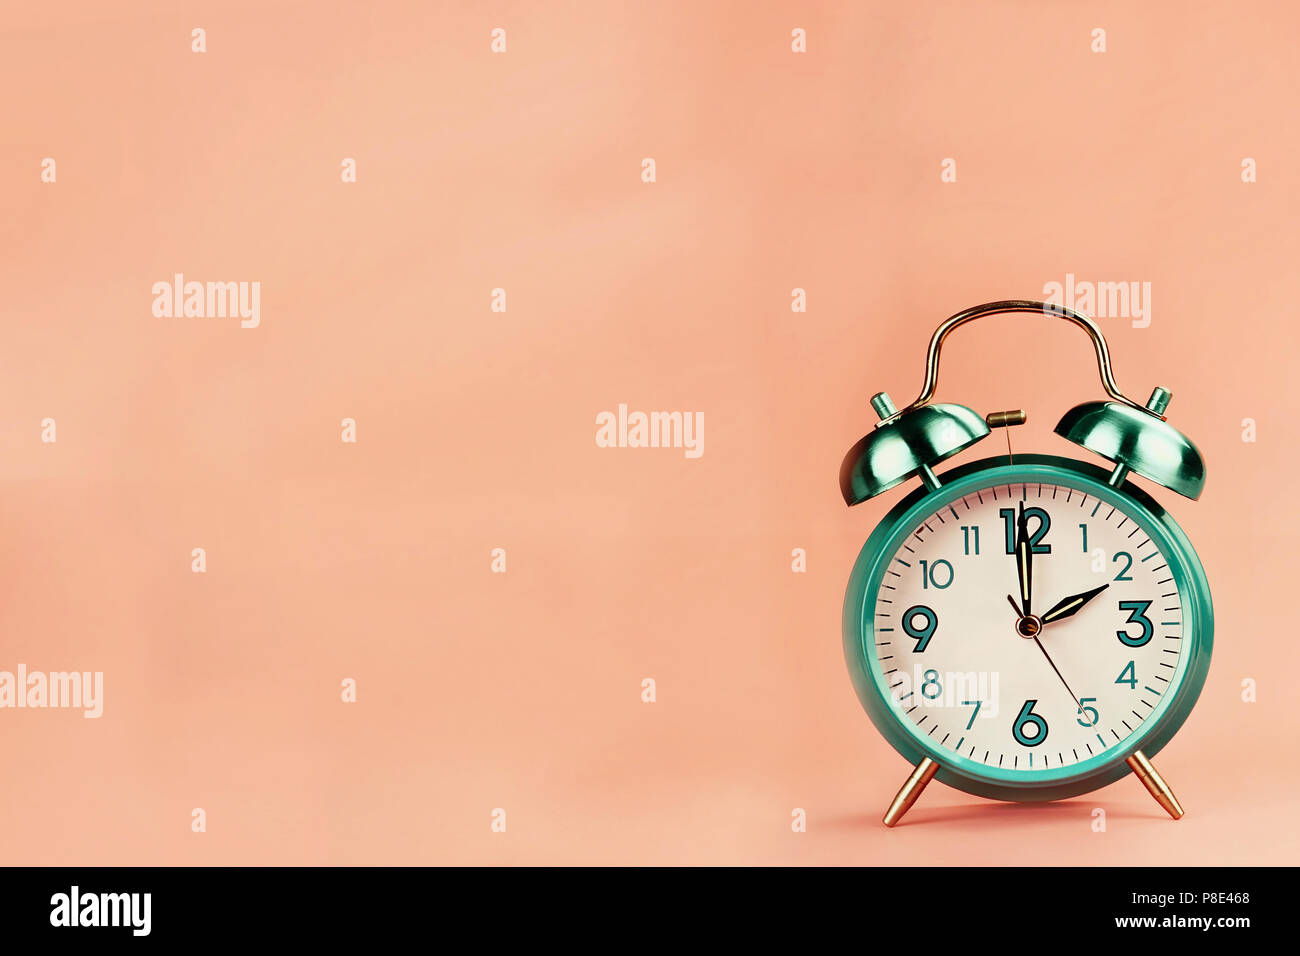 Vintage style alarm clock with room for free background space for text. Stock Photo